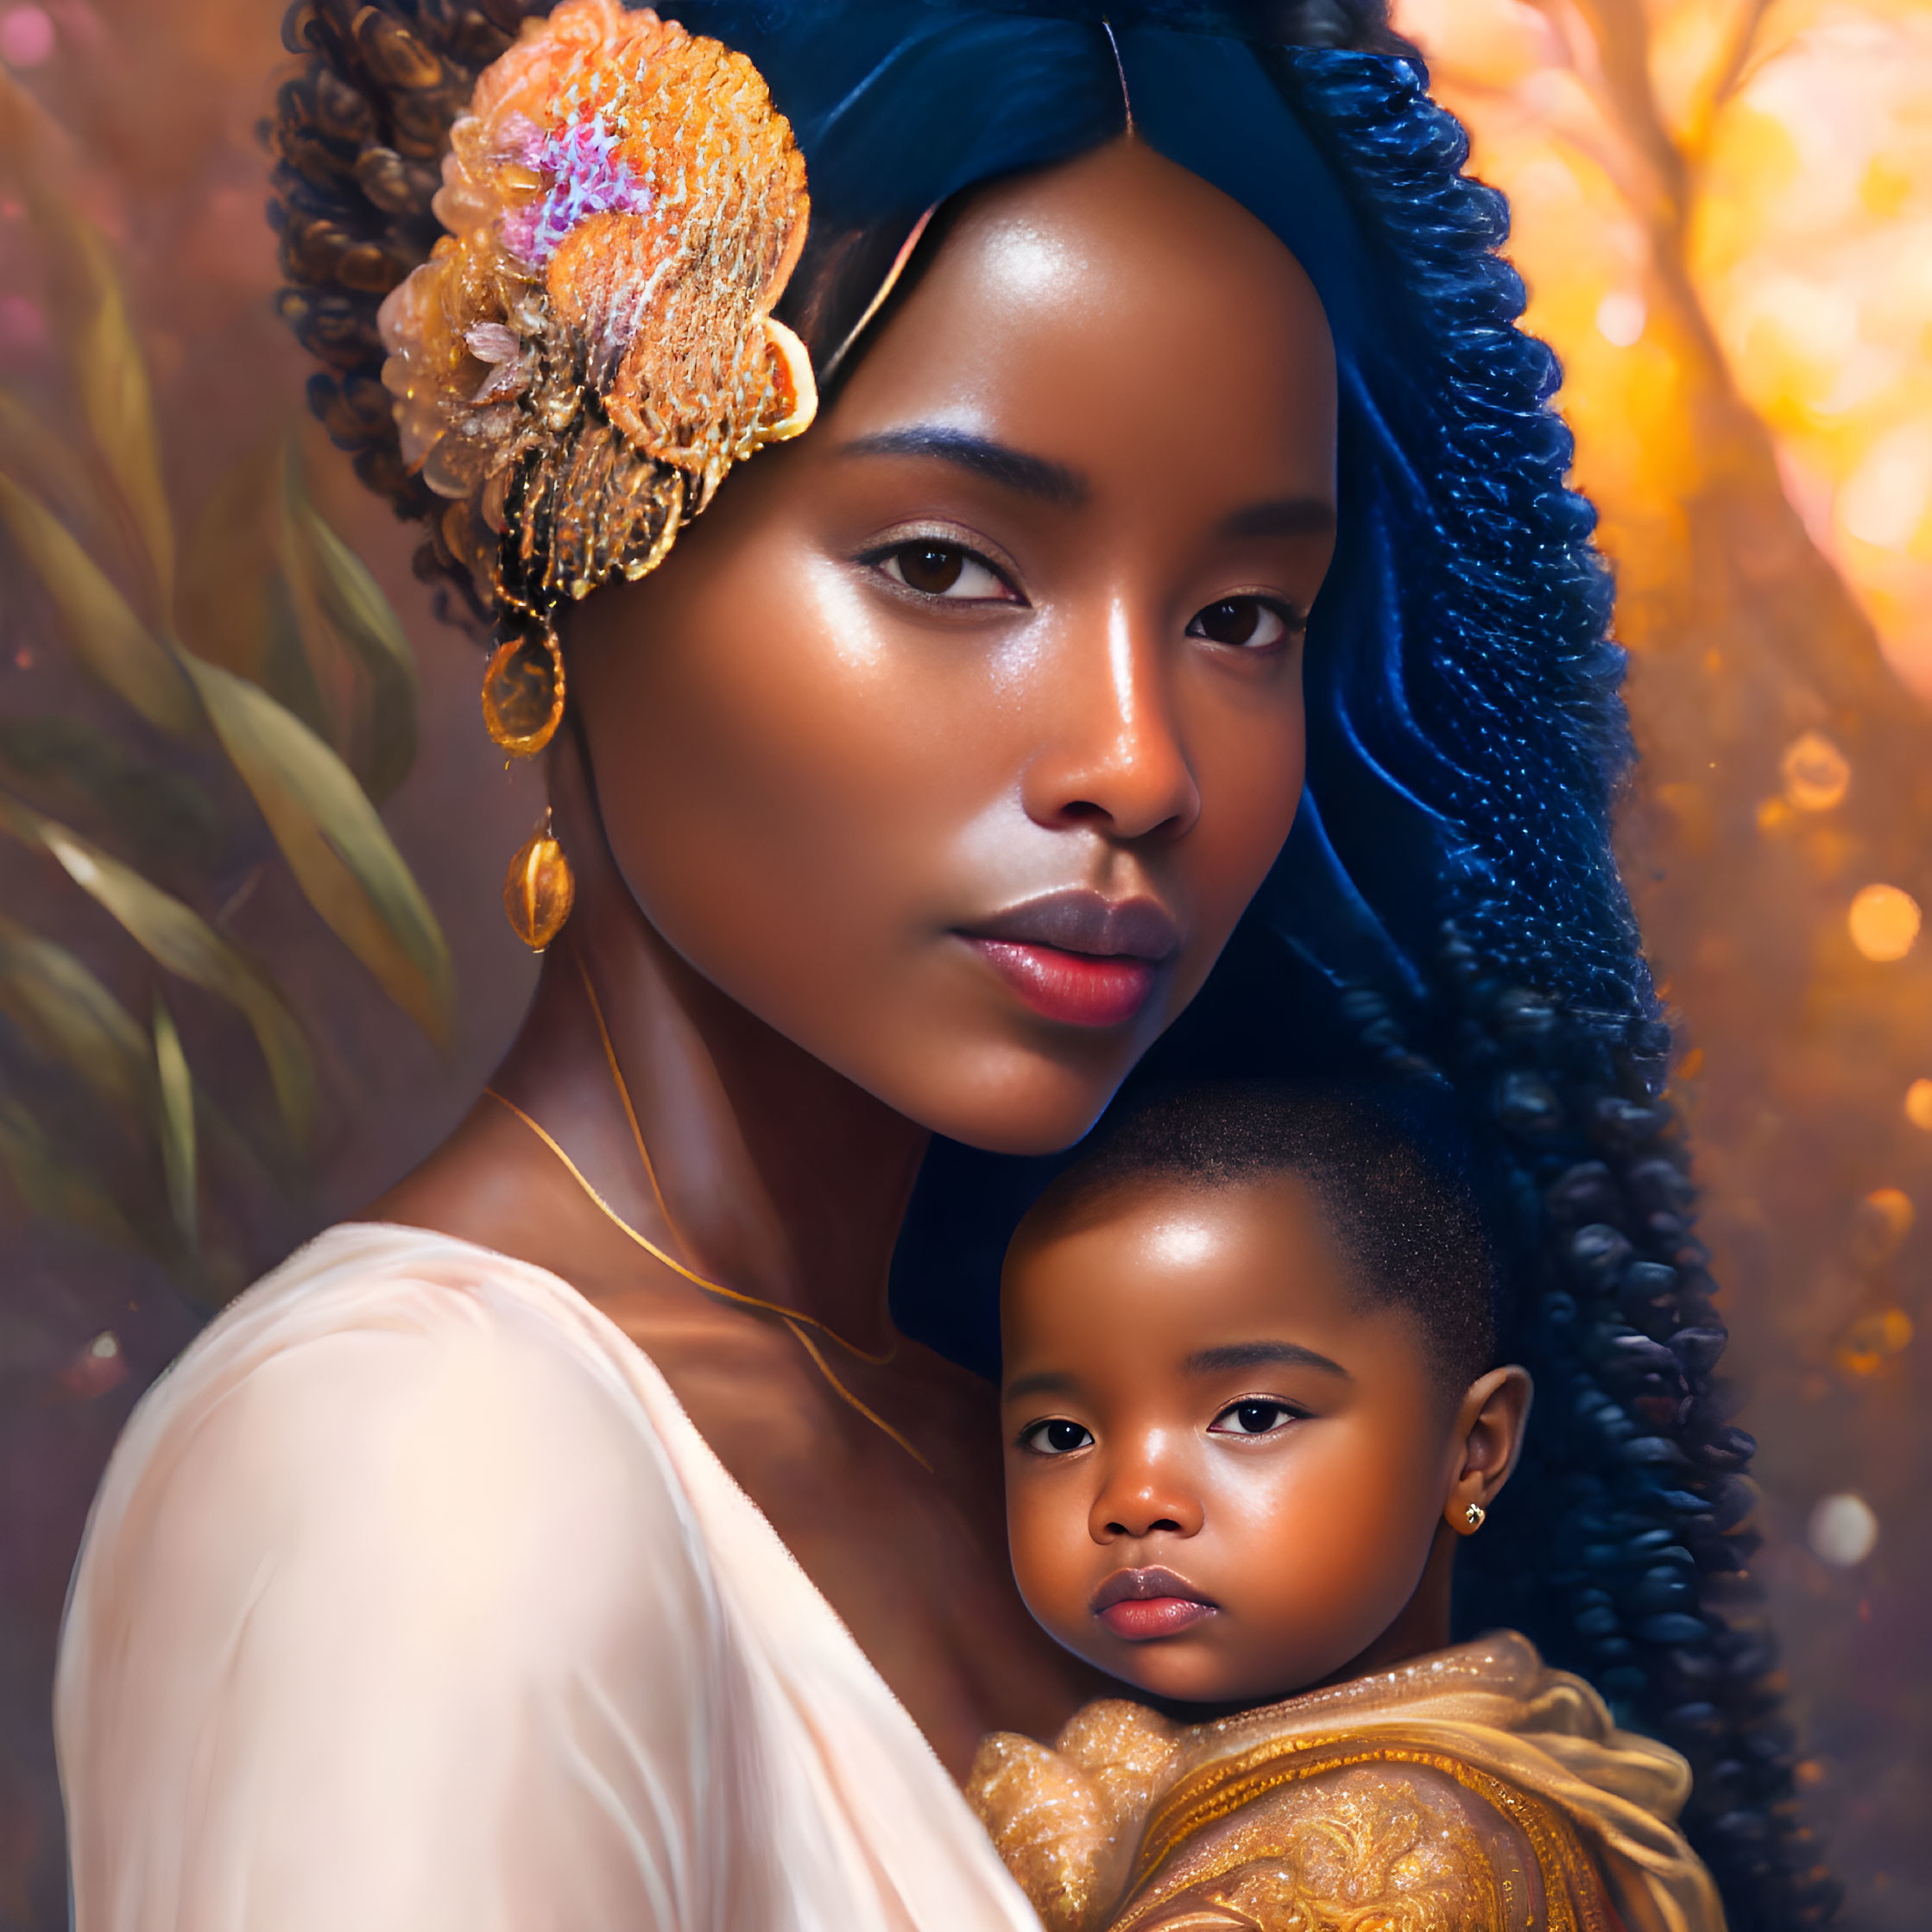 Portrait of a woman with decorative hairpiece holding a child against warm background